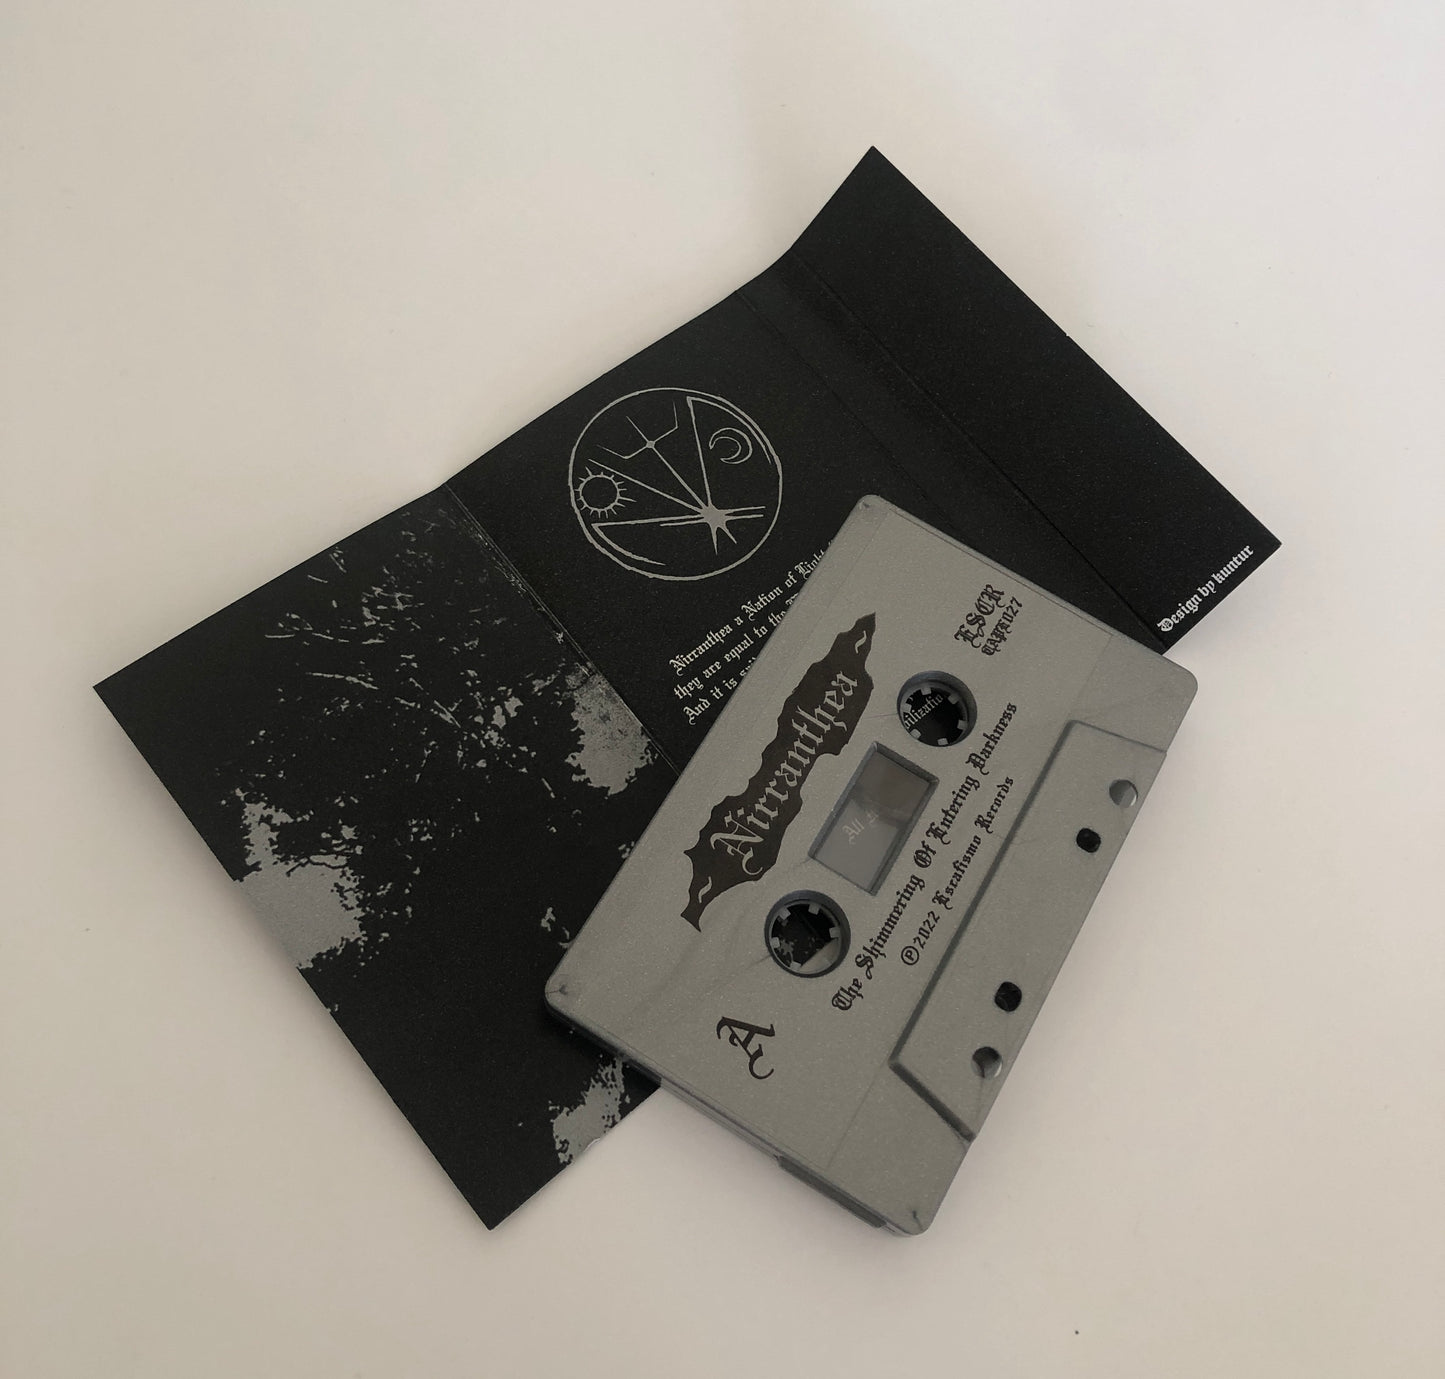 ESCR-027: Nirranthea (Id) "The Shimmering of Entering Darkness" - Pro tape